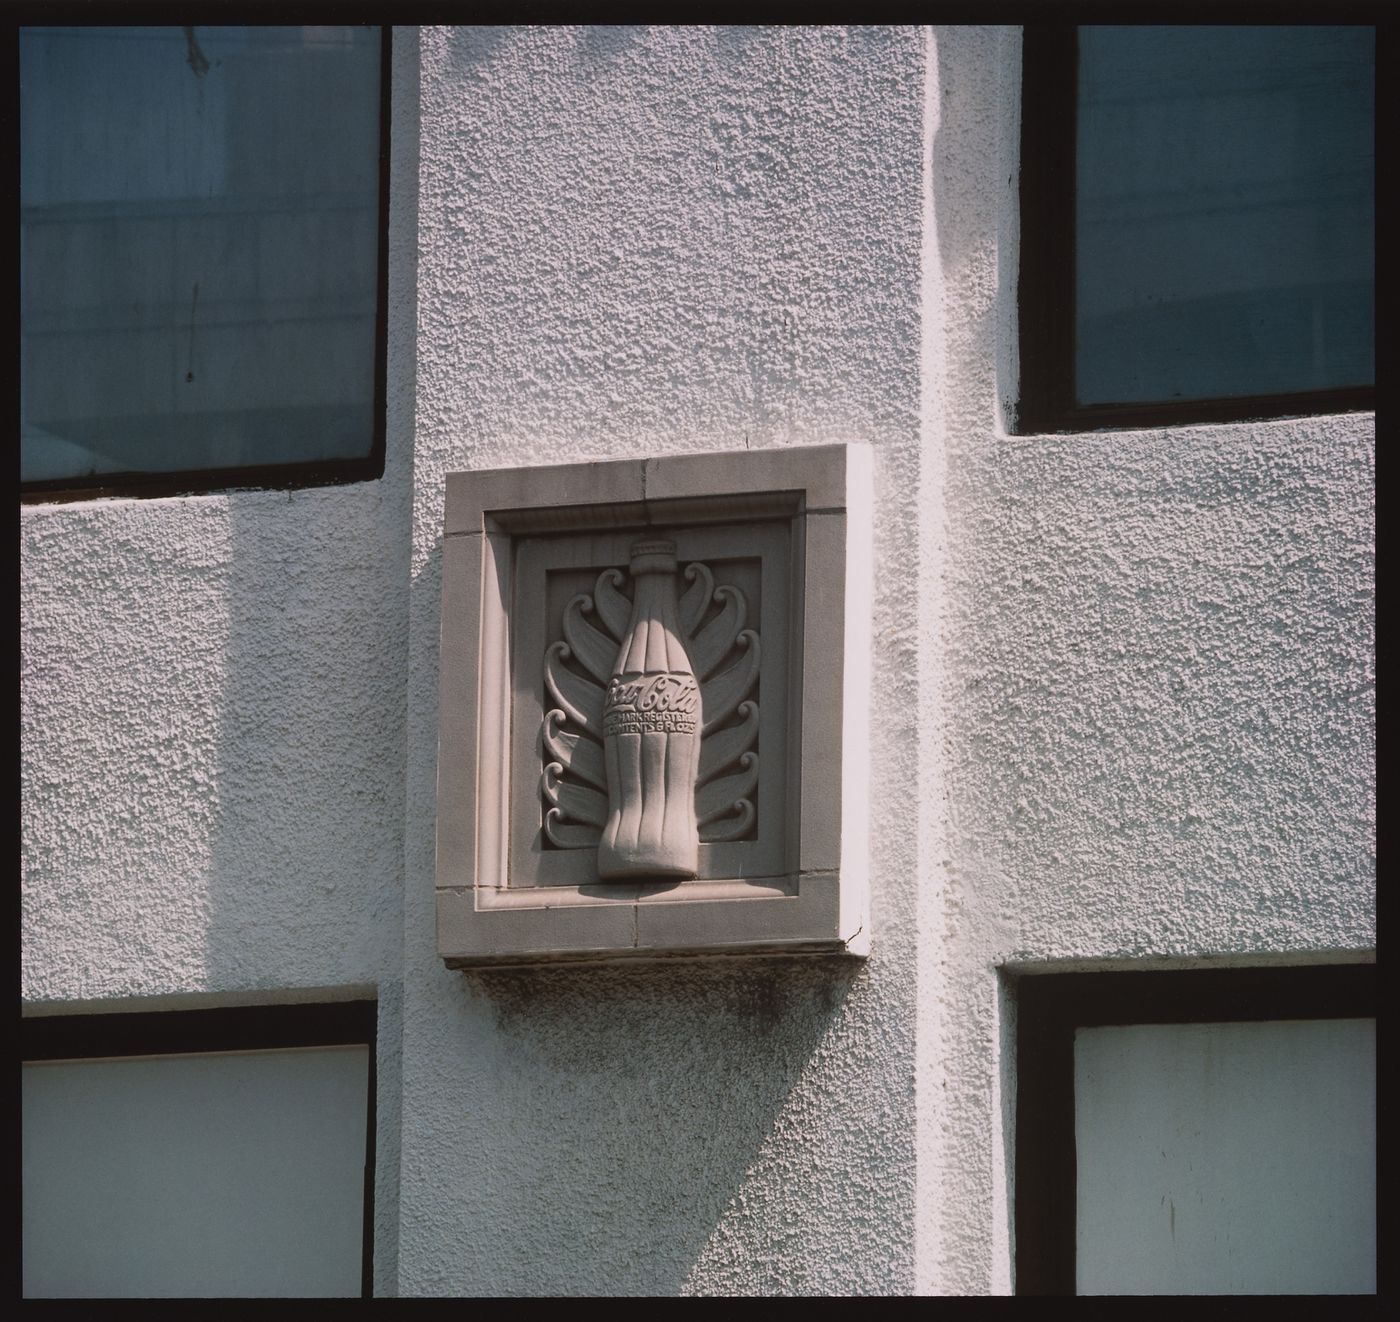 Detail view of sculptural relief of the Coca Cola bottle, on stucco wall of building